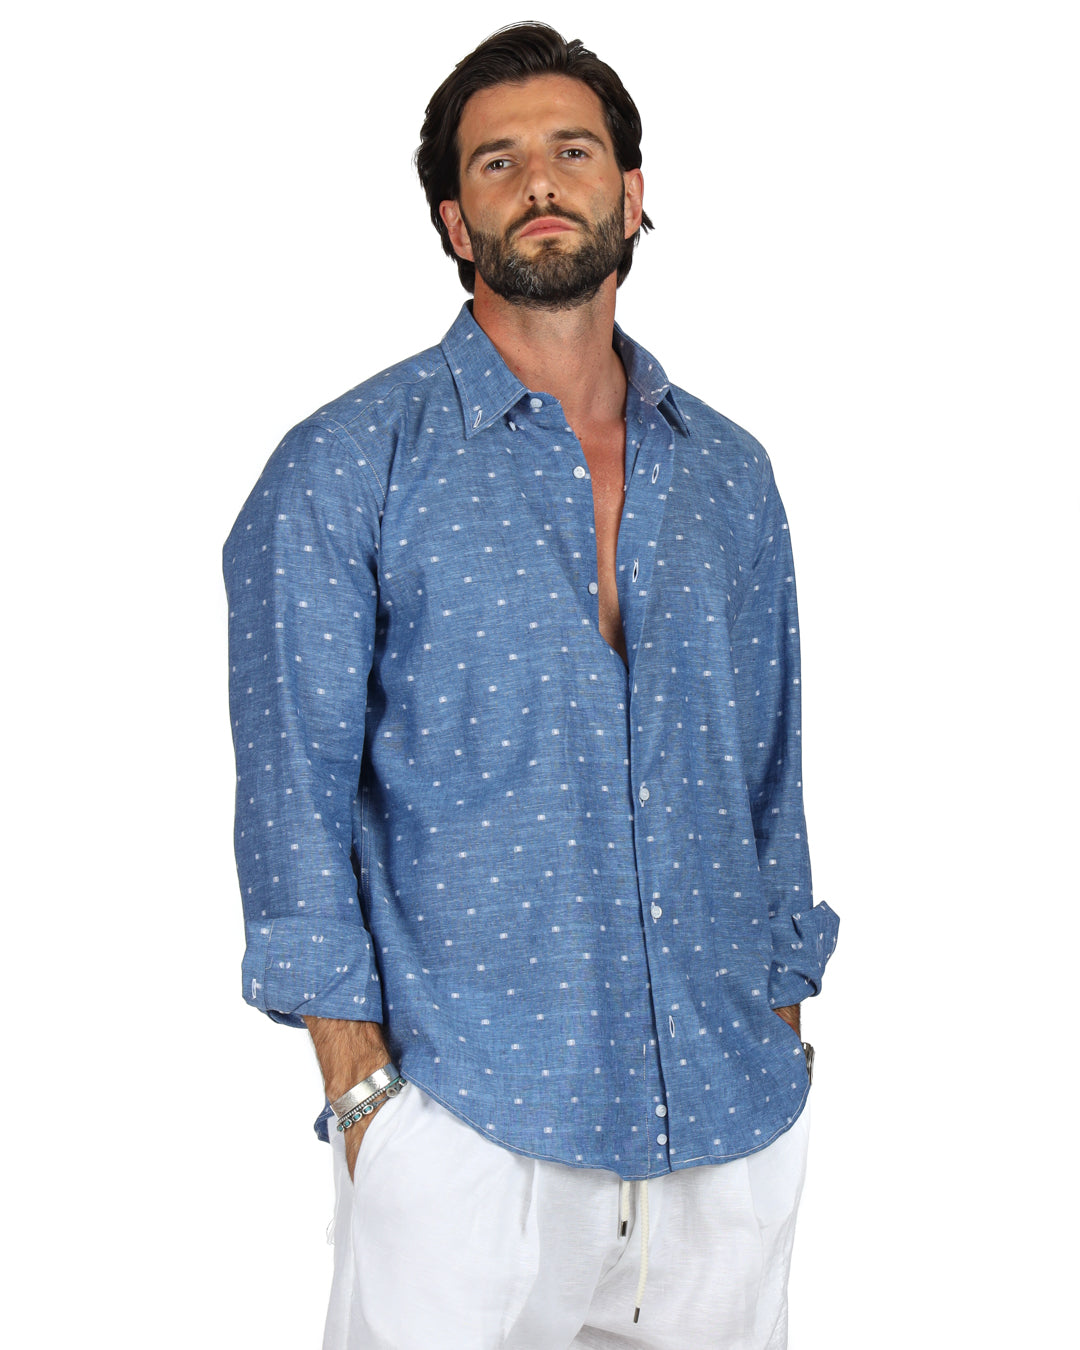 Salina - Classic denim shirt with white linen embroidery